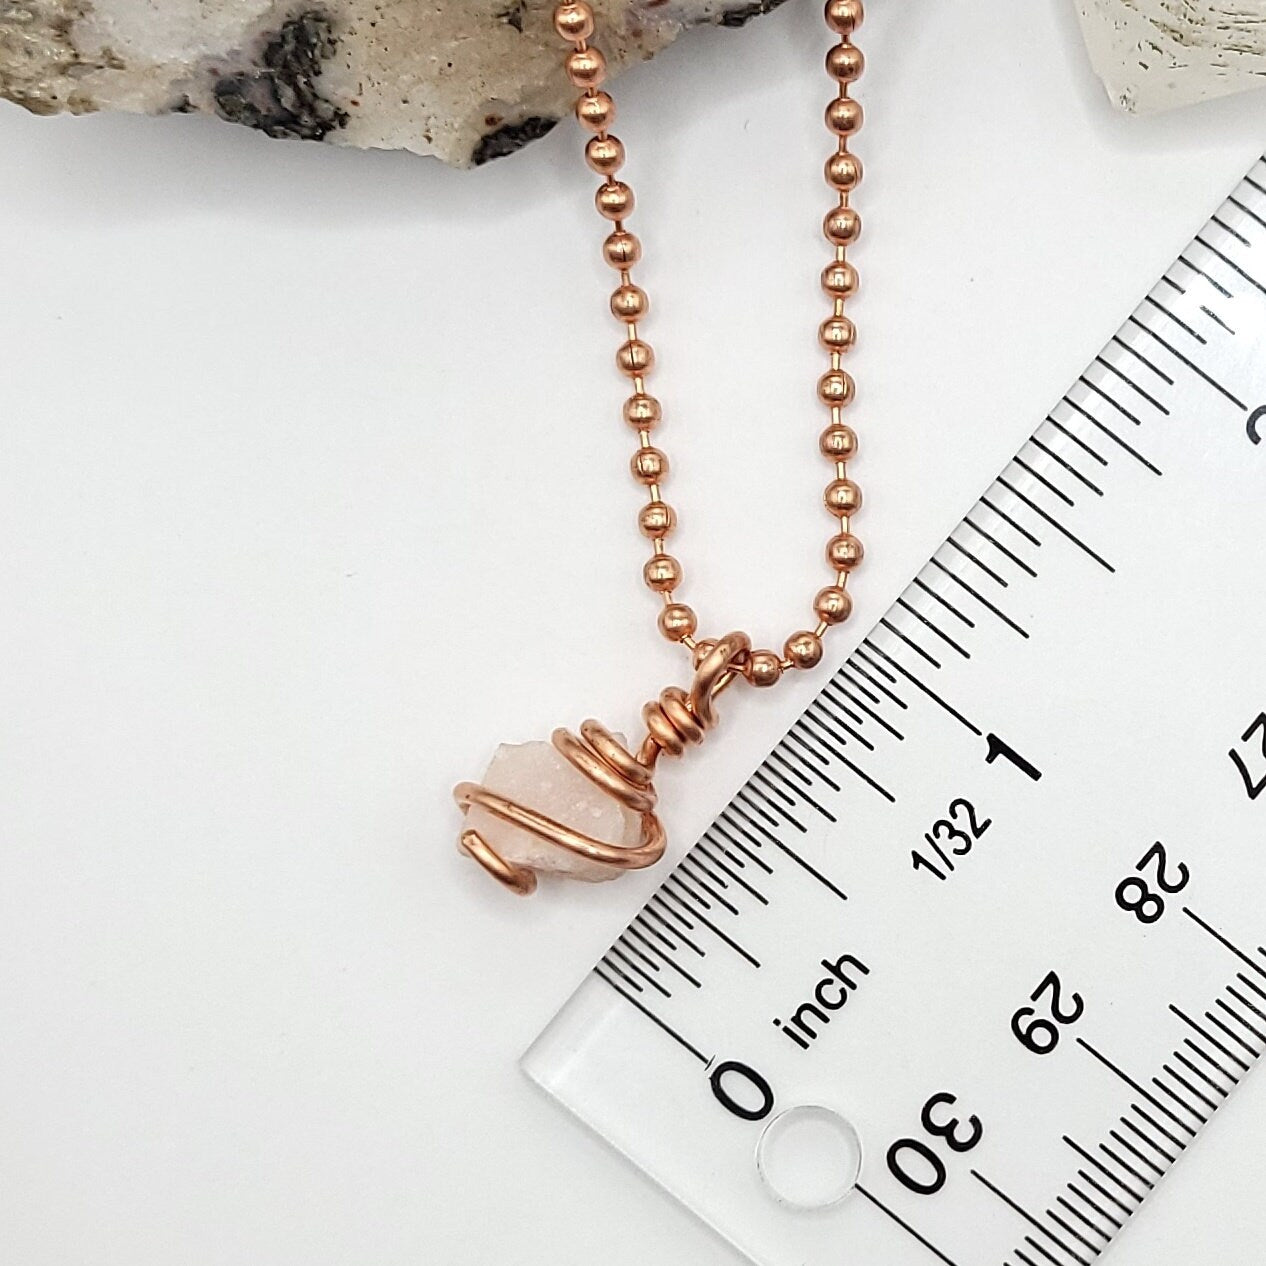 Pink Petalite Necklace, Copper Wire Wrapped Petalite Pendant, Raw Petalite Jewelry, Crystal Necklace